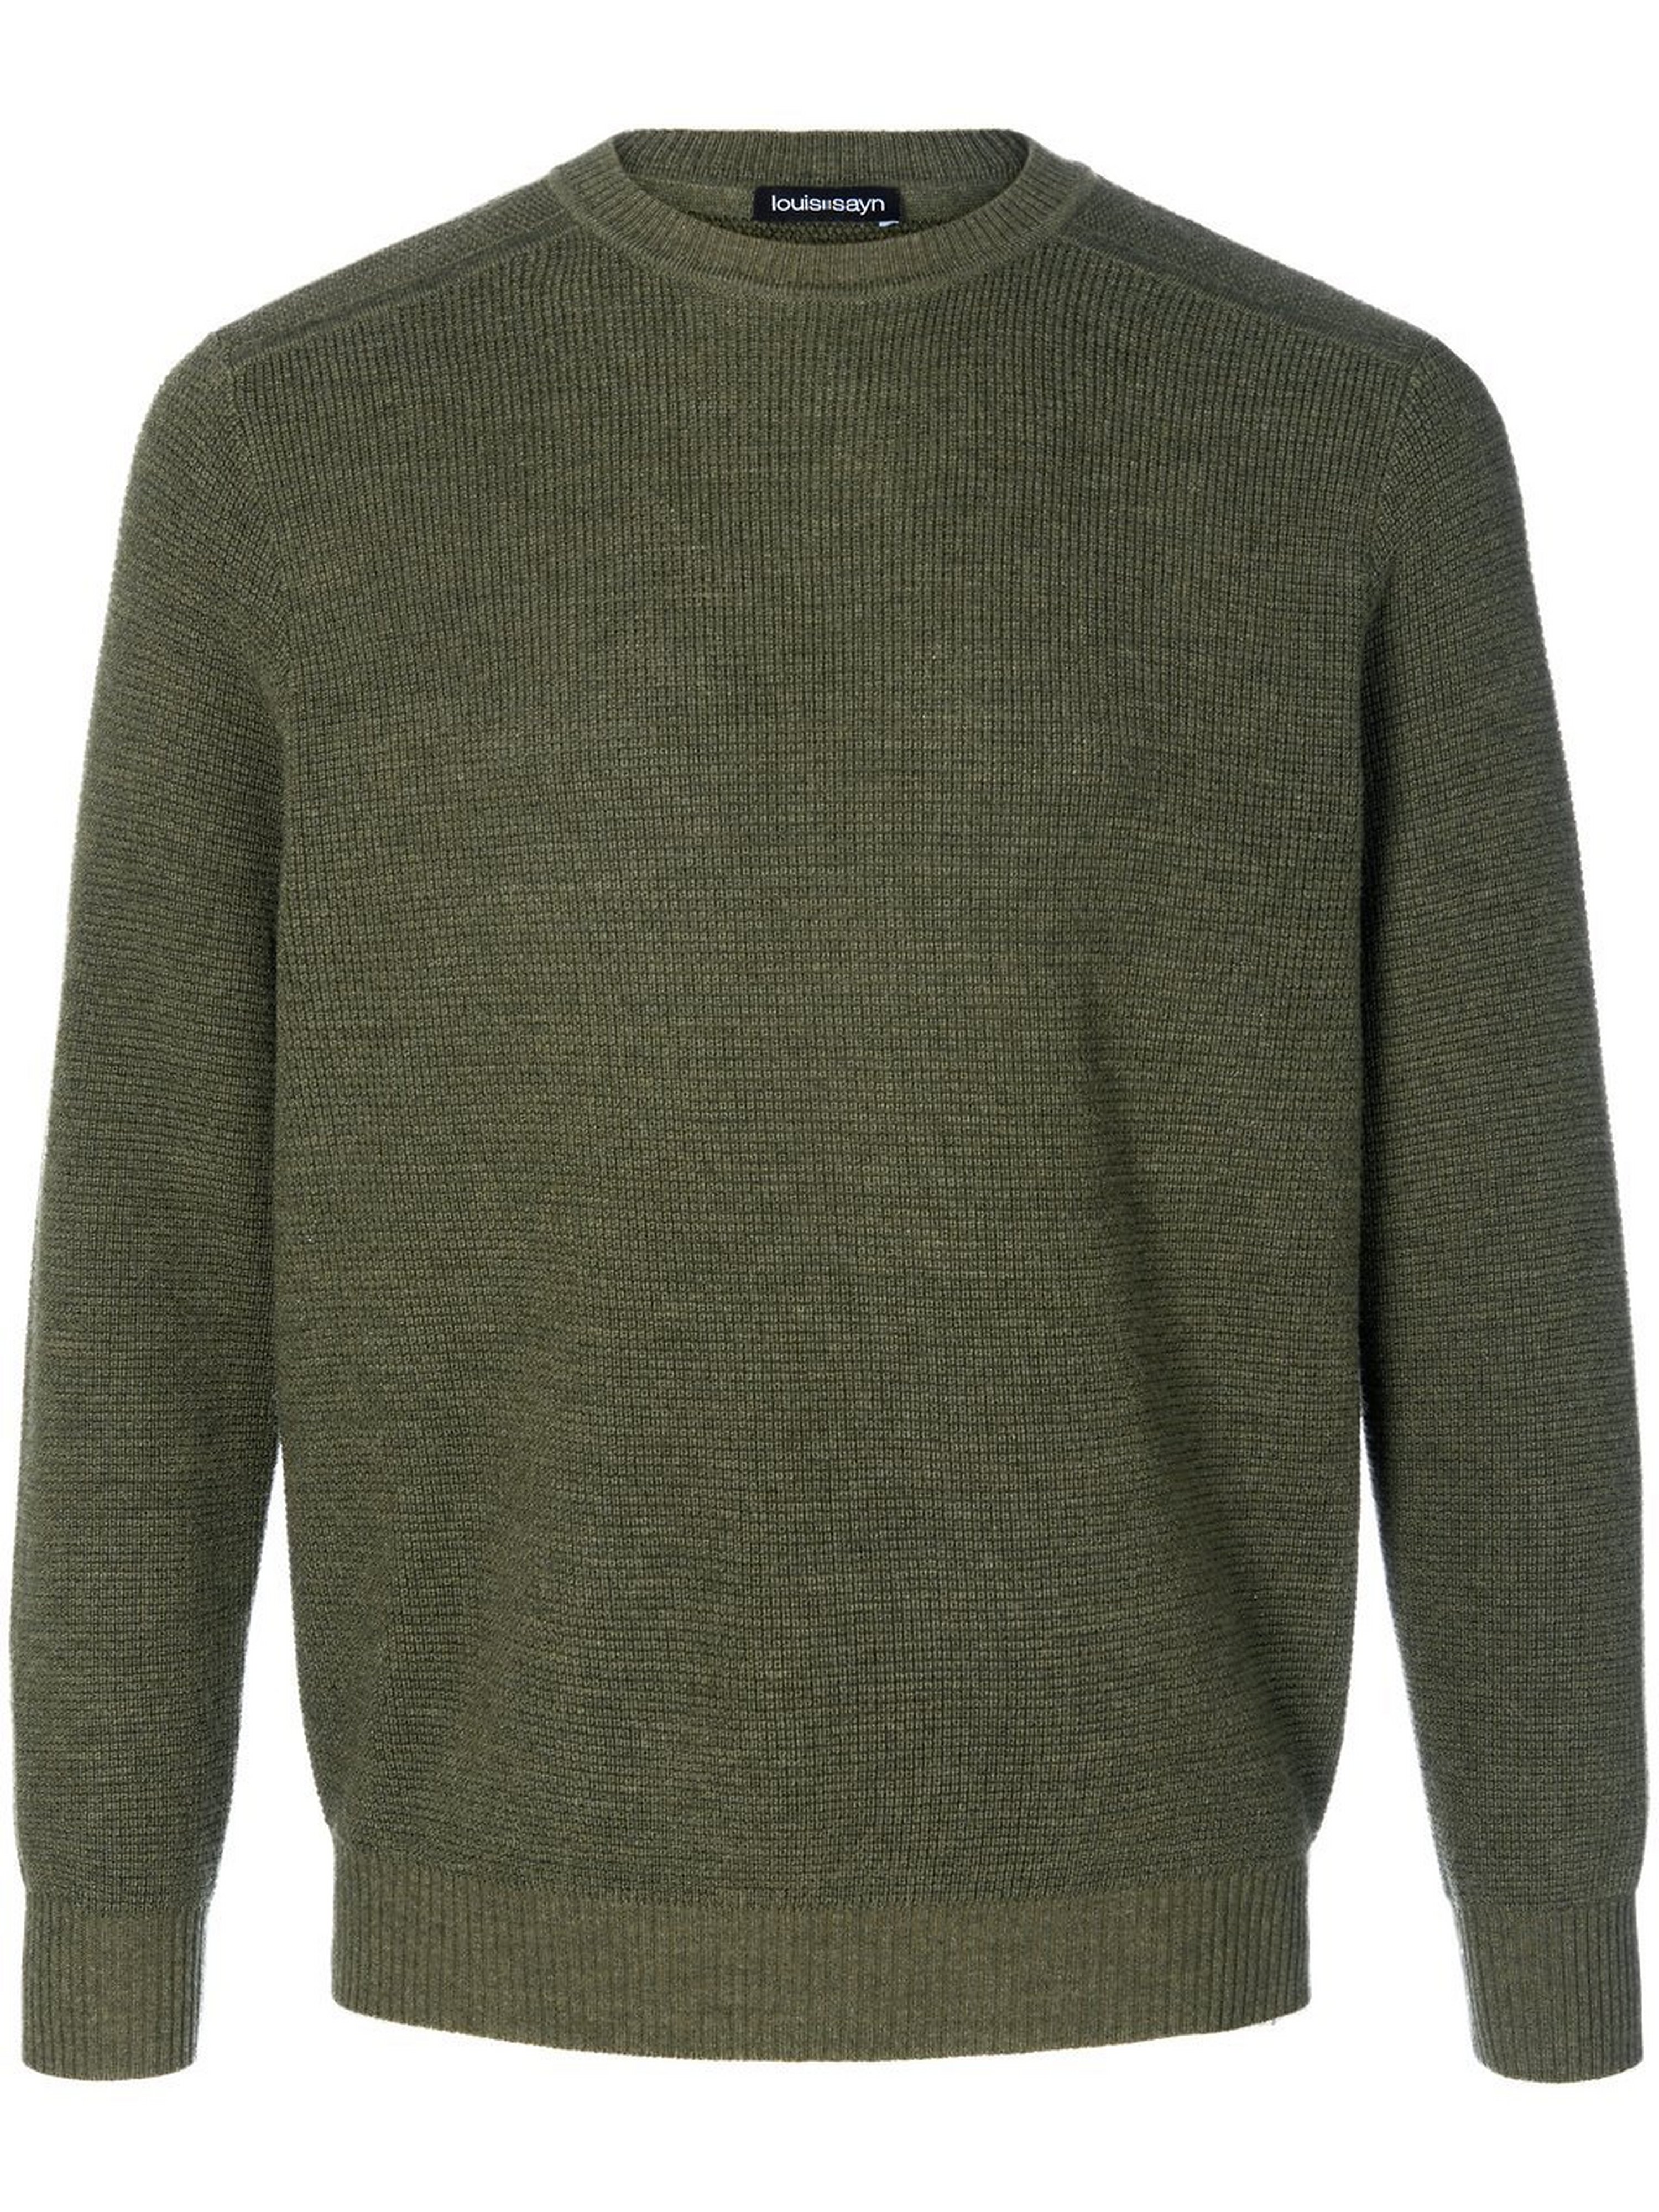 Le pull col ras cou  Louis Sayn vert taille 58